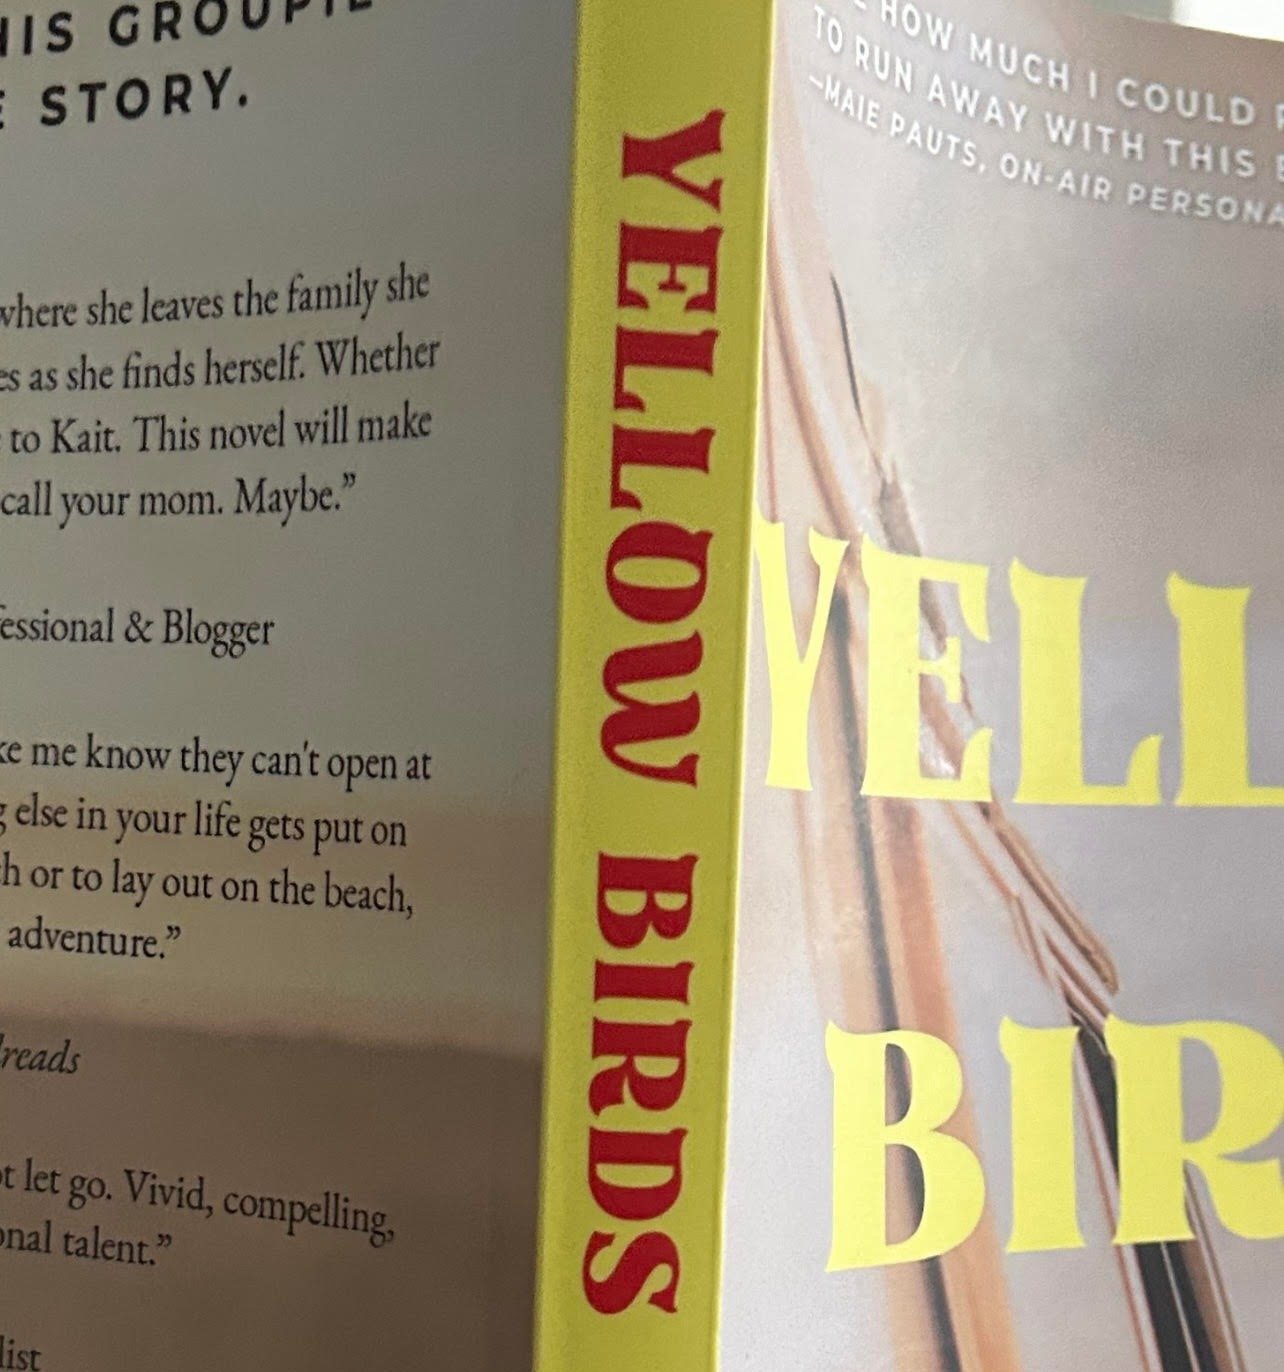 You know what's better than sex?

A great review from @kirkus_reviews. 😜 

Here's what &quot;Kirkus Reviews&quot; had to say about Karen Green's JUST RE:leased novel, &quot;Yellow Birds.&quot;

&ldquo;Fans of Taylor Jenkins Reid&rsquo;s Daisy Jones 